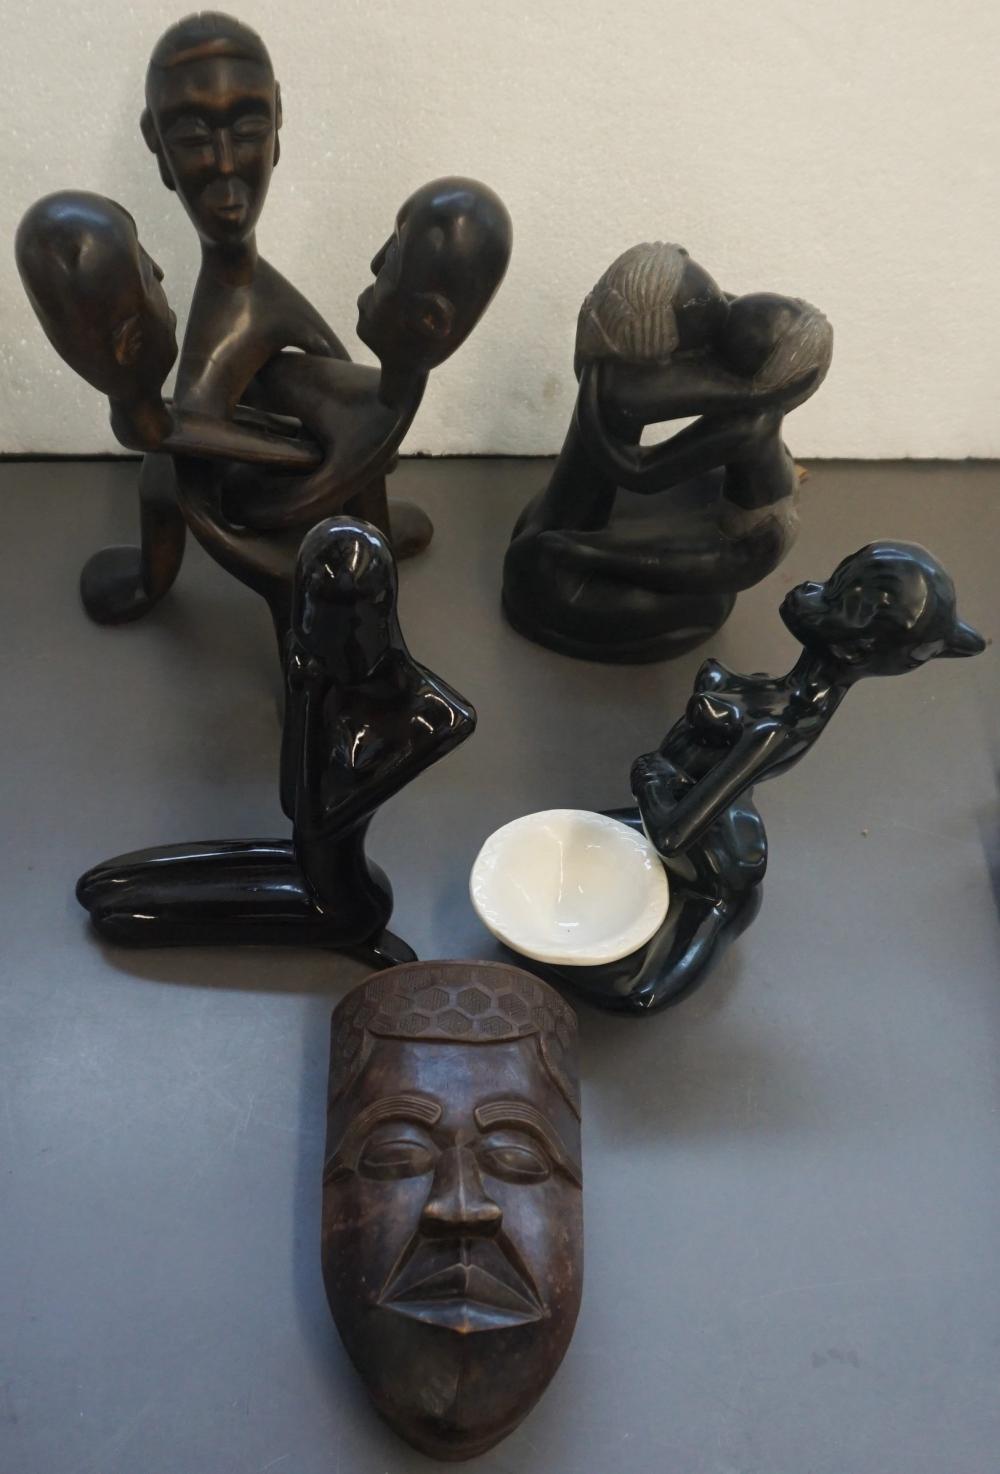 FIVE AFRICAN THEMED CERAMIC STONE 32b34f